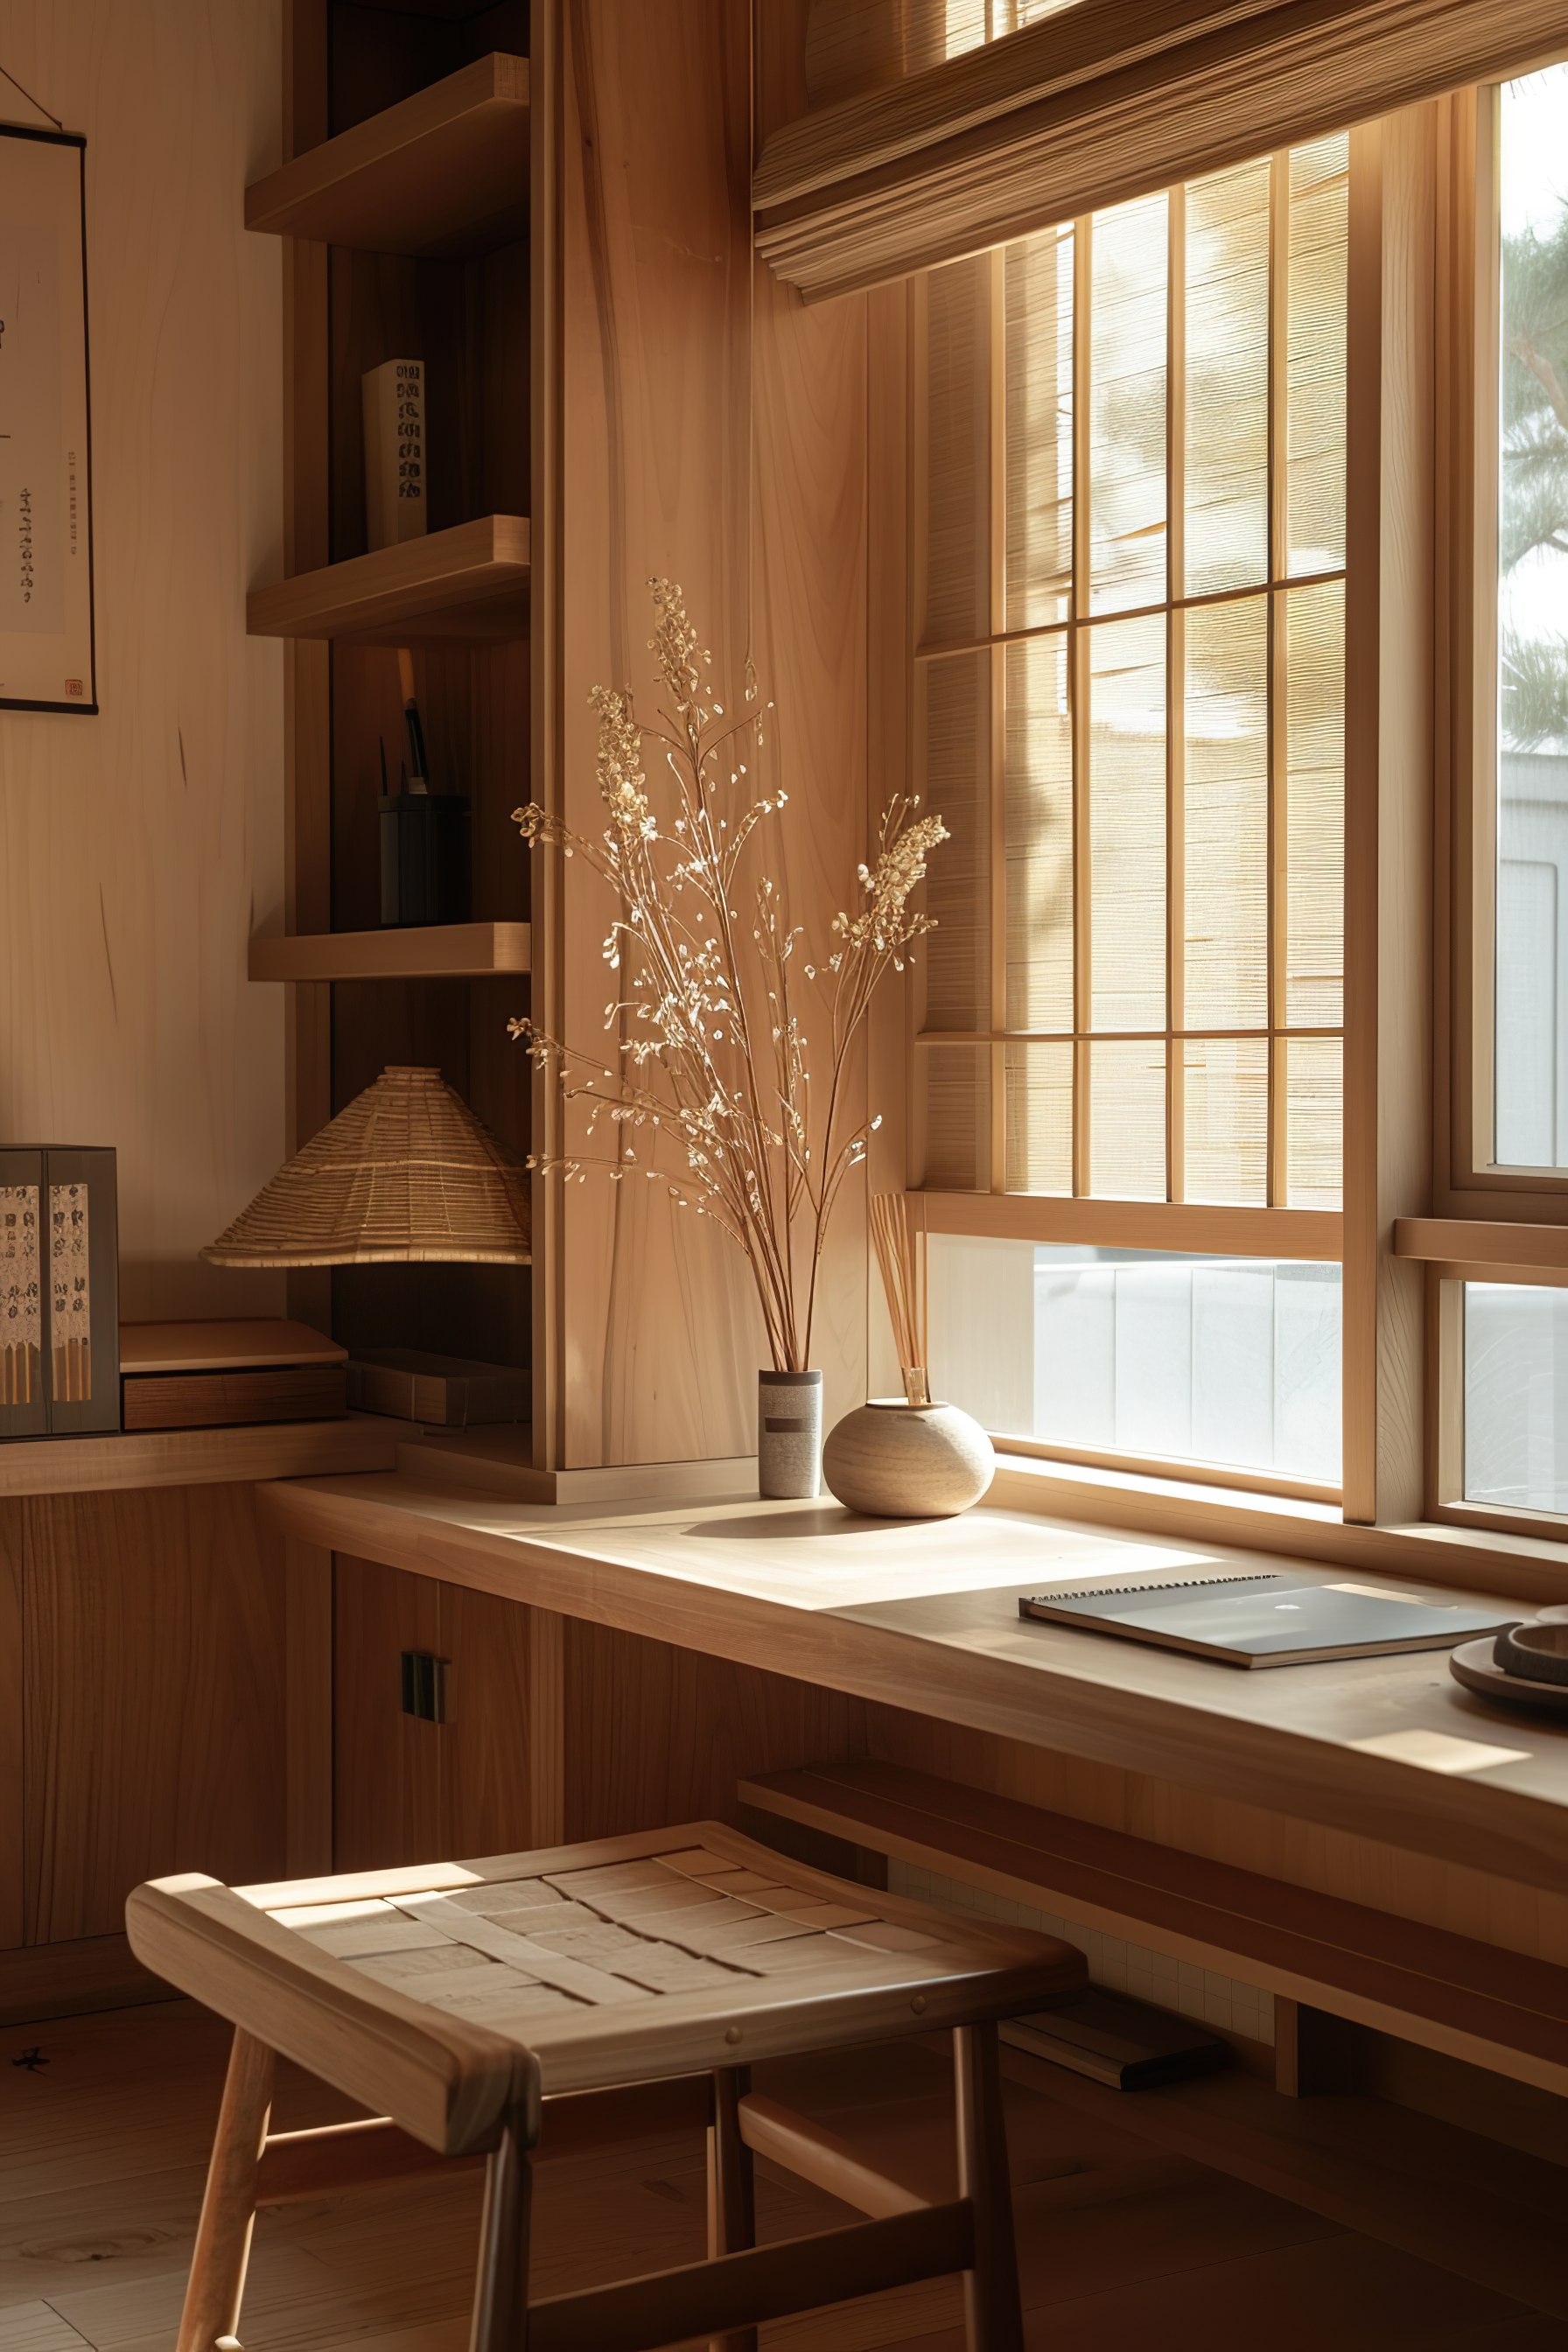 A serene wooden interior with a vase of dried flowers, window with blinds casting warm light, a desk and a traditional hat on a shelf.